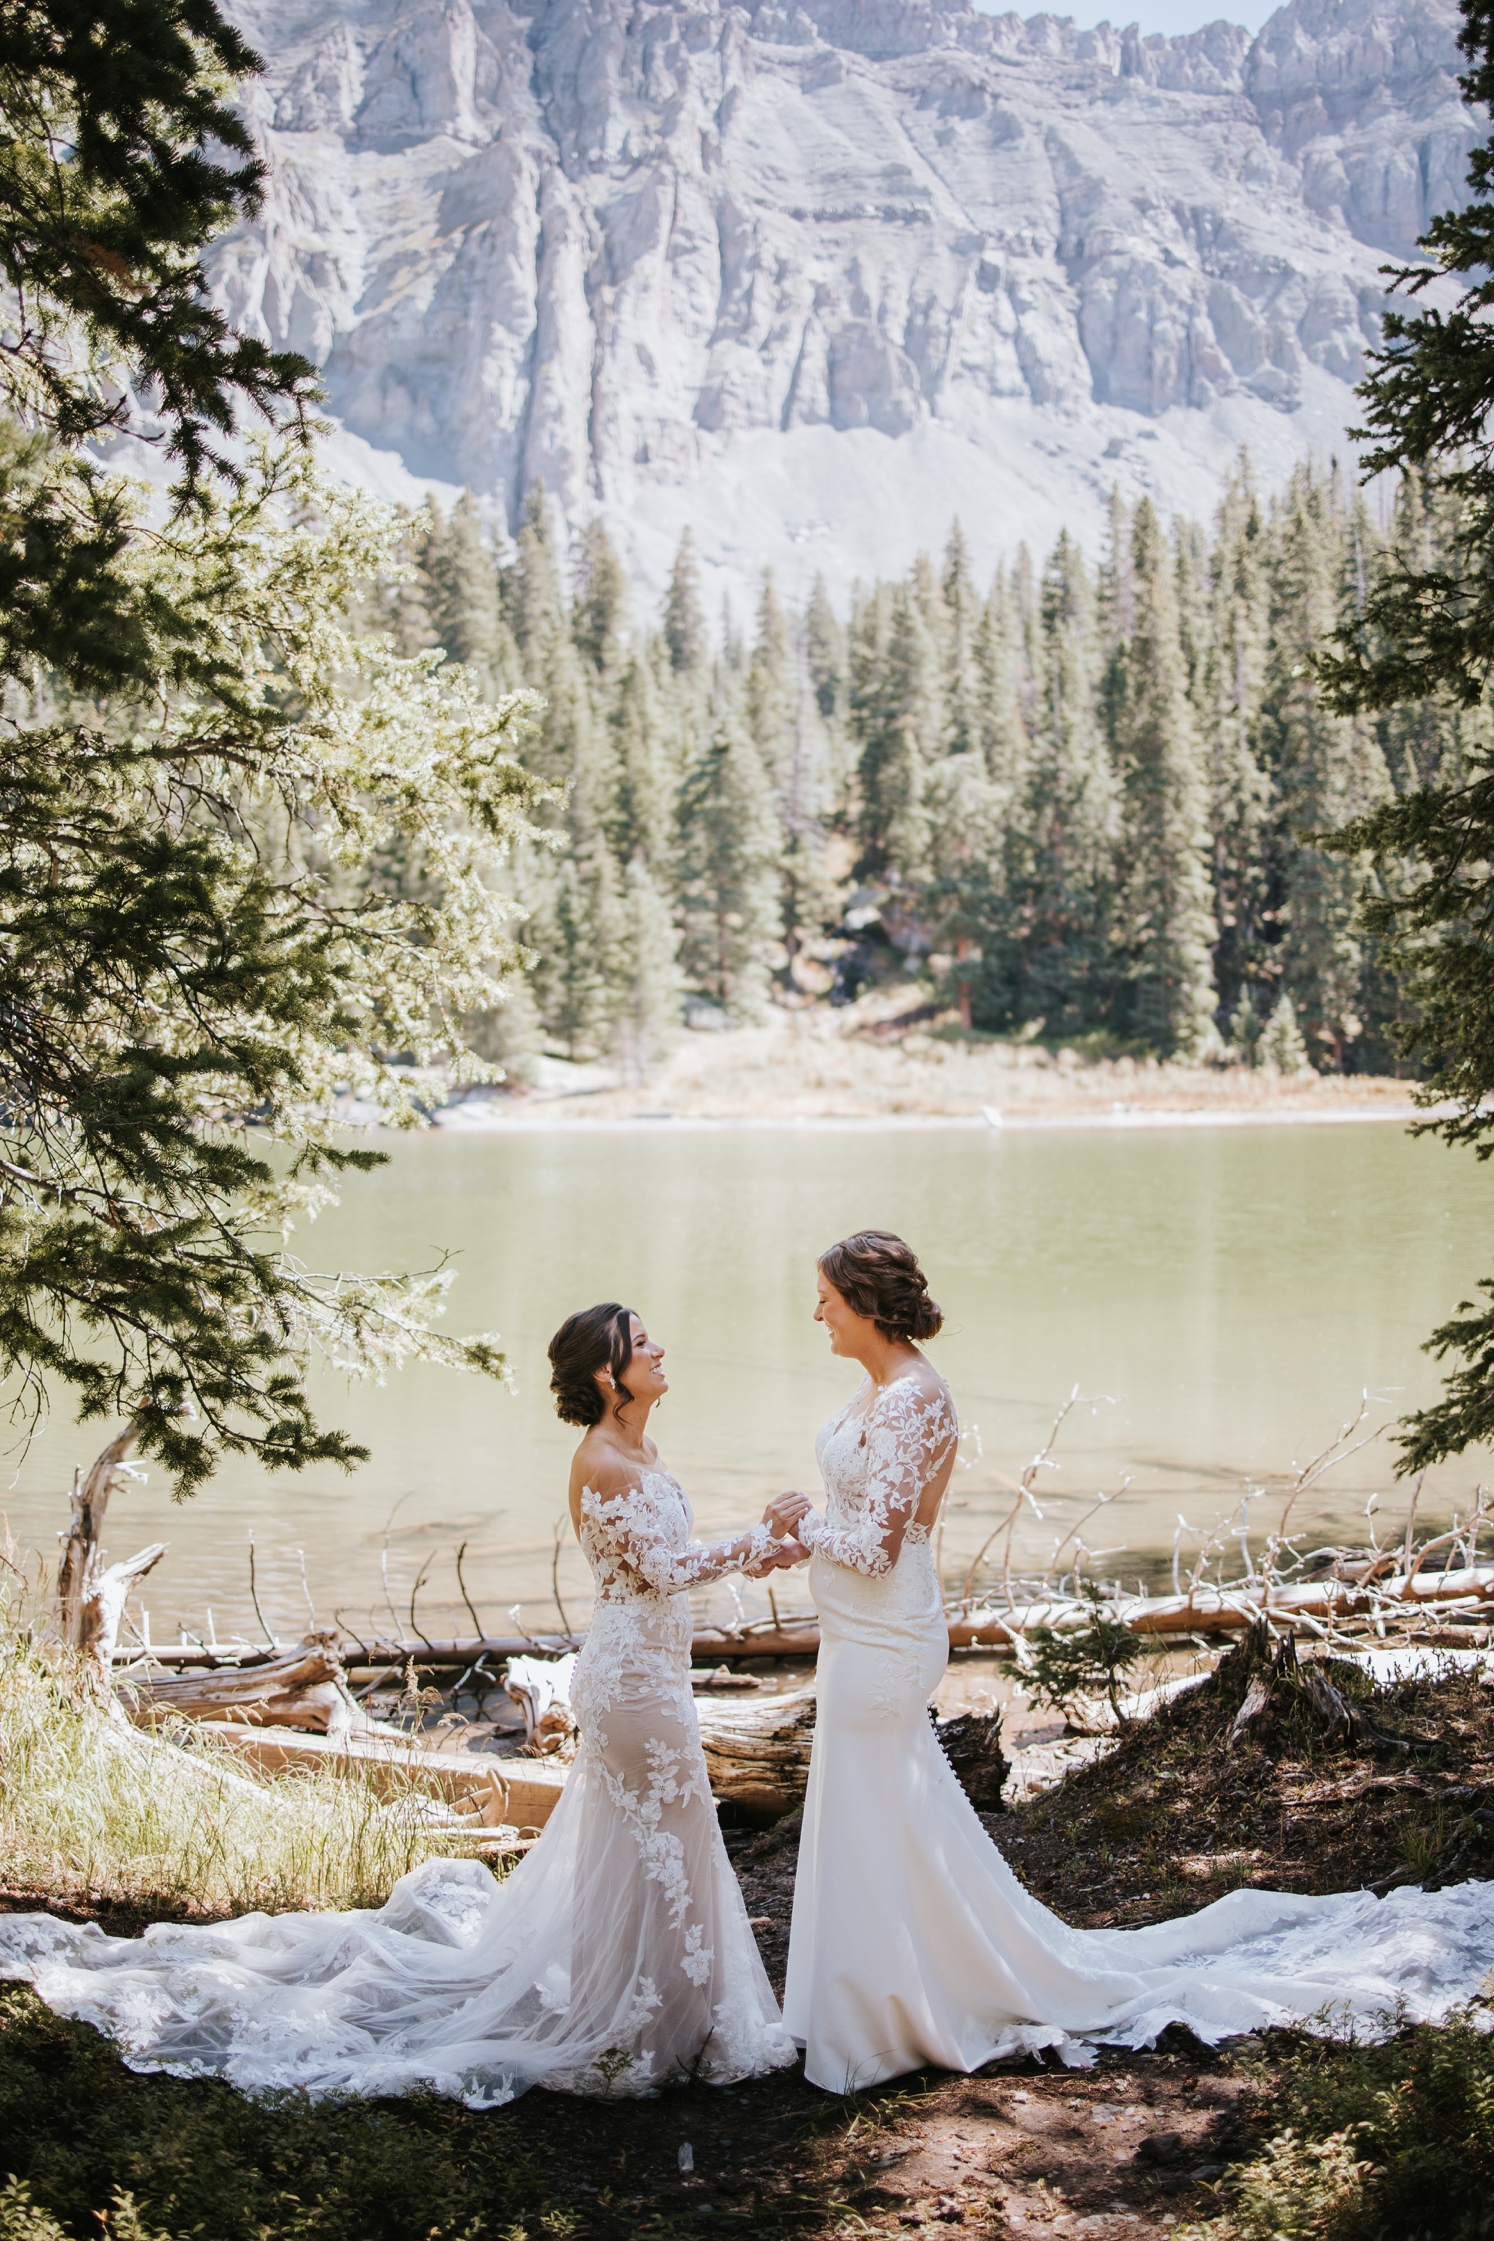 Brides seeing each other at first look | McArthur Weddings and Events